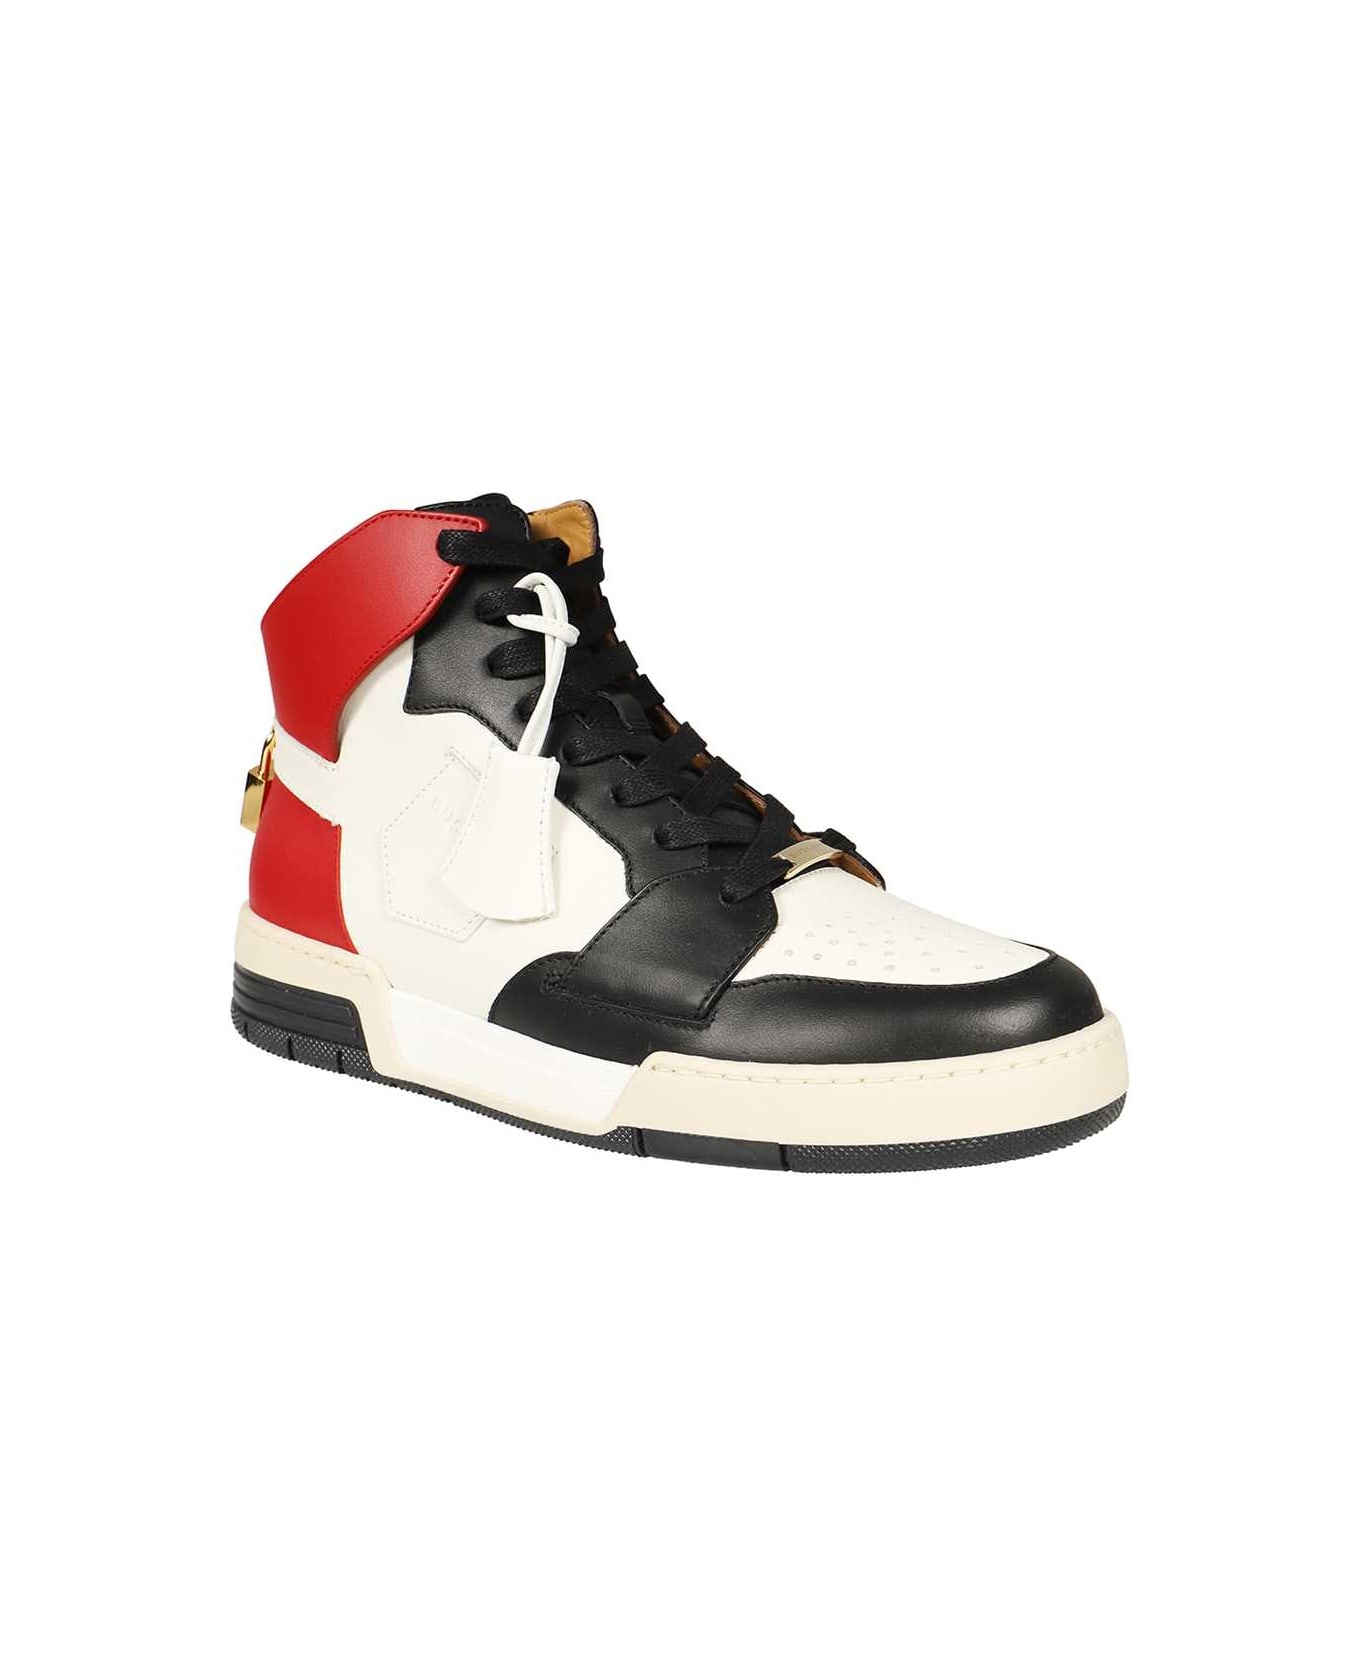 Buscemi Leather High-top Sneakers - red スニーカー